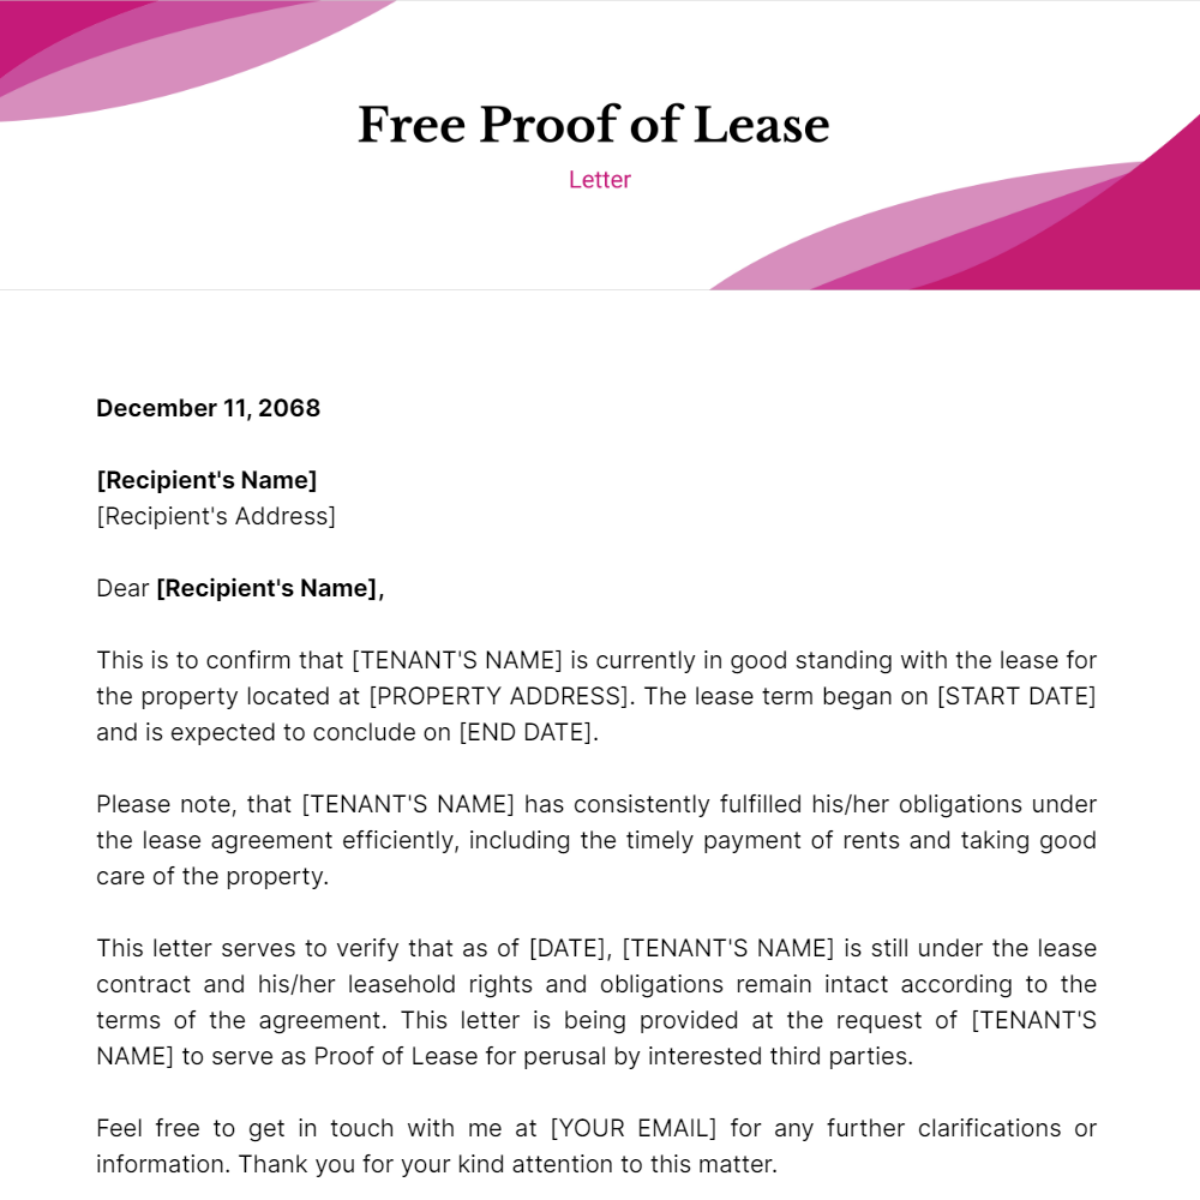 Proof of Lease Letter Template